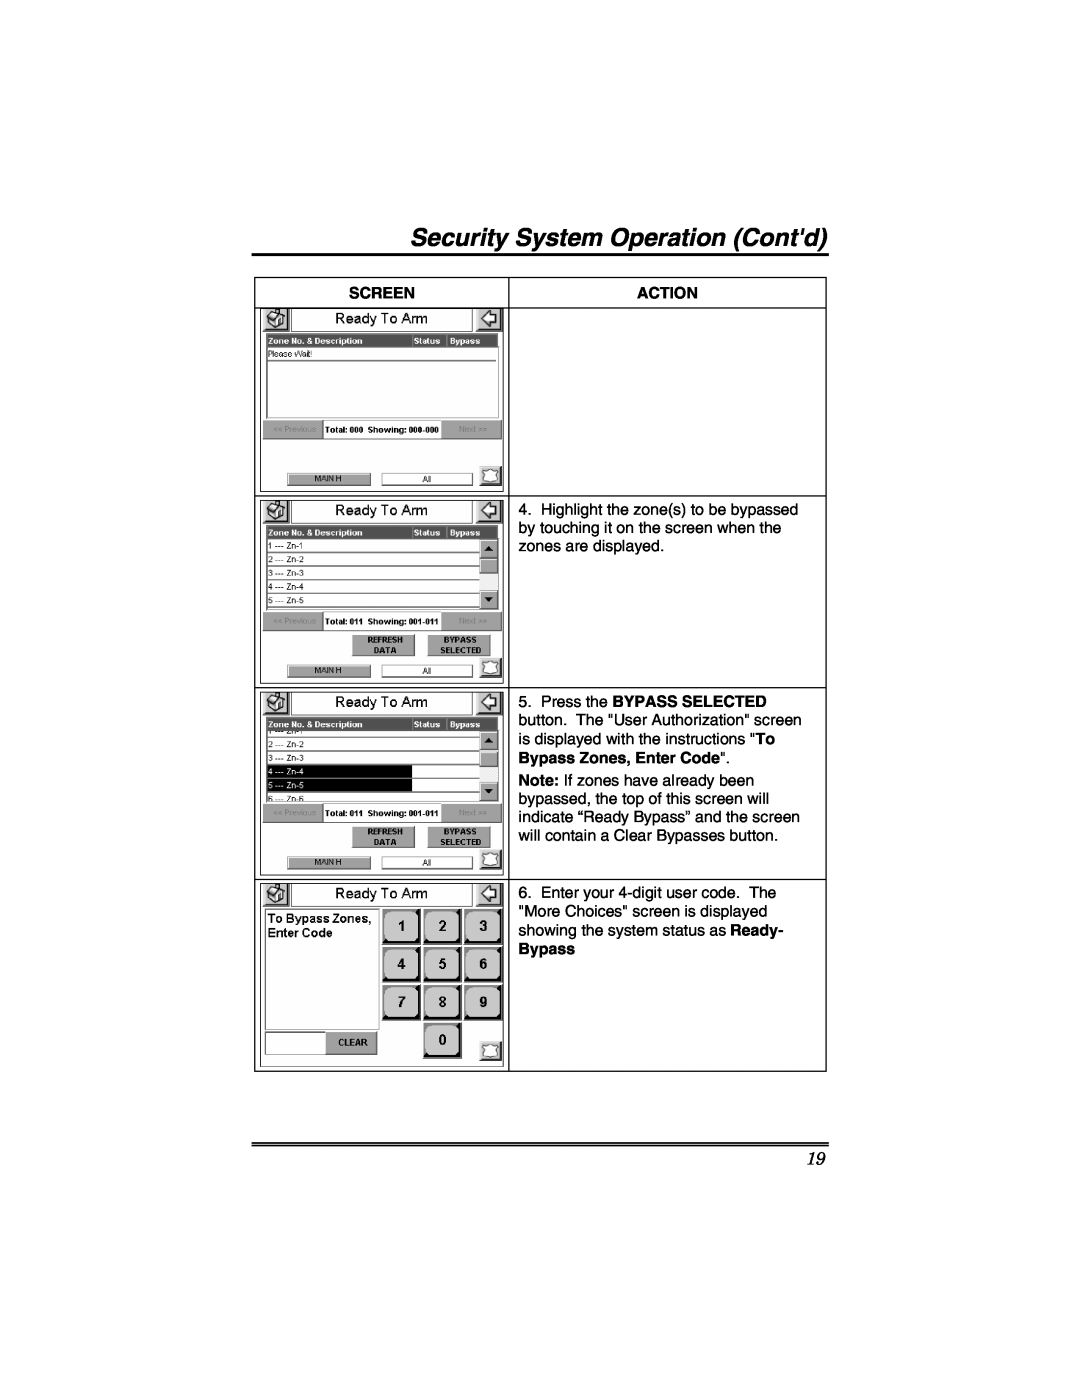 Honeywell 6271V manual Security System Operation Contd, Screen, Action, Press the BYPASS SELECTED, Bypass Zones, Enter Code 